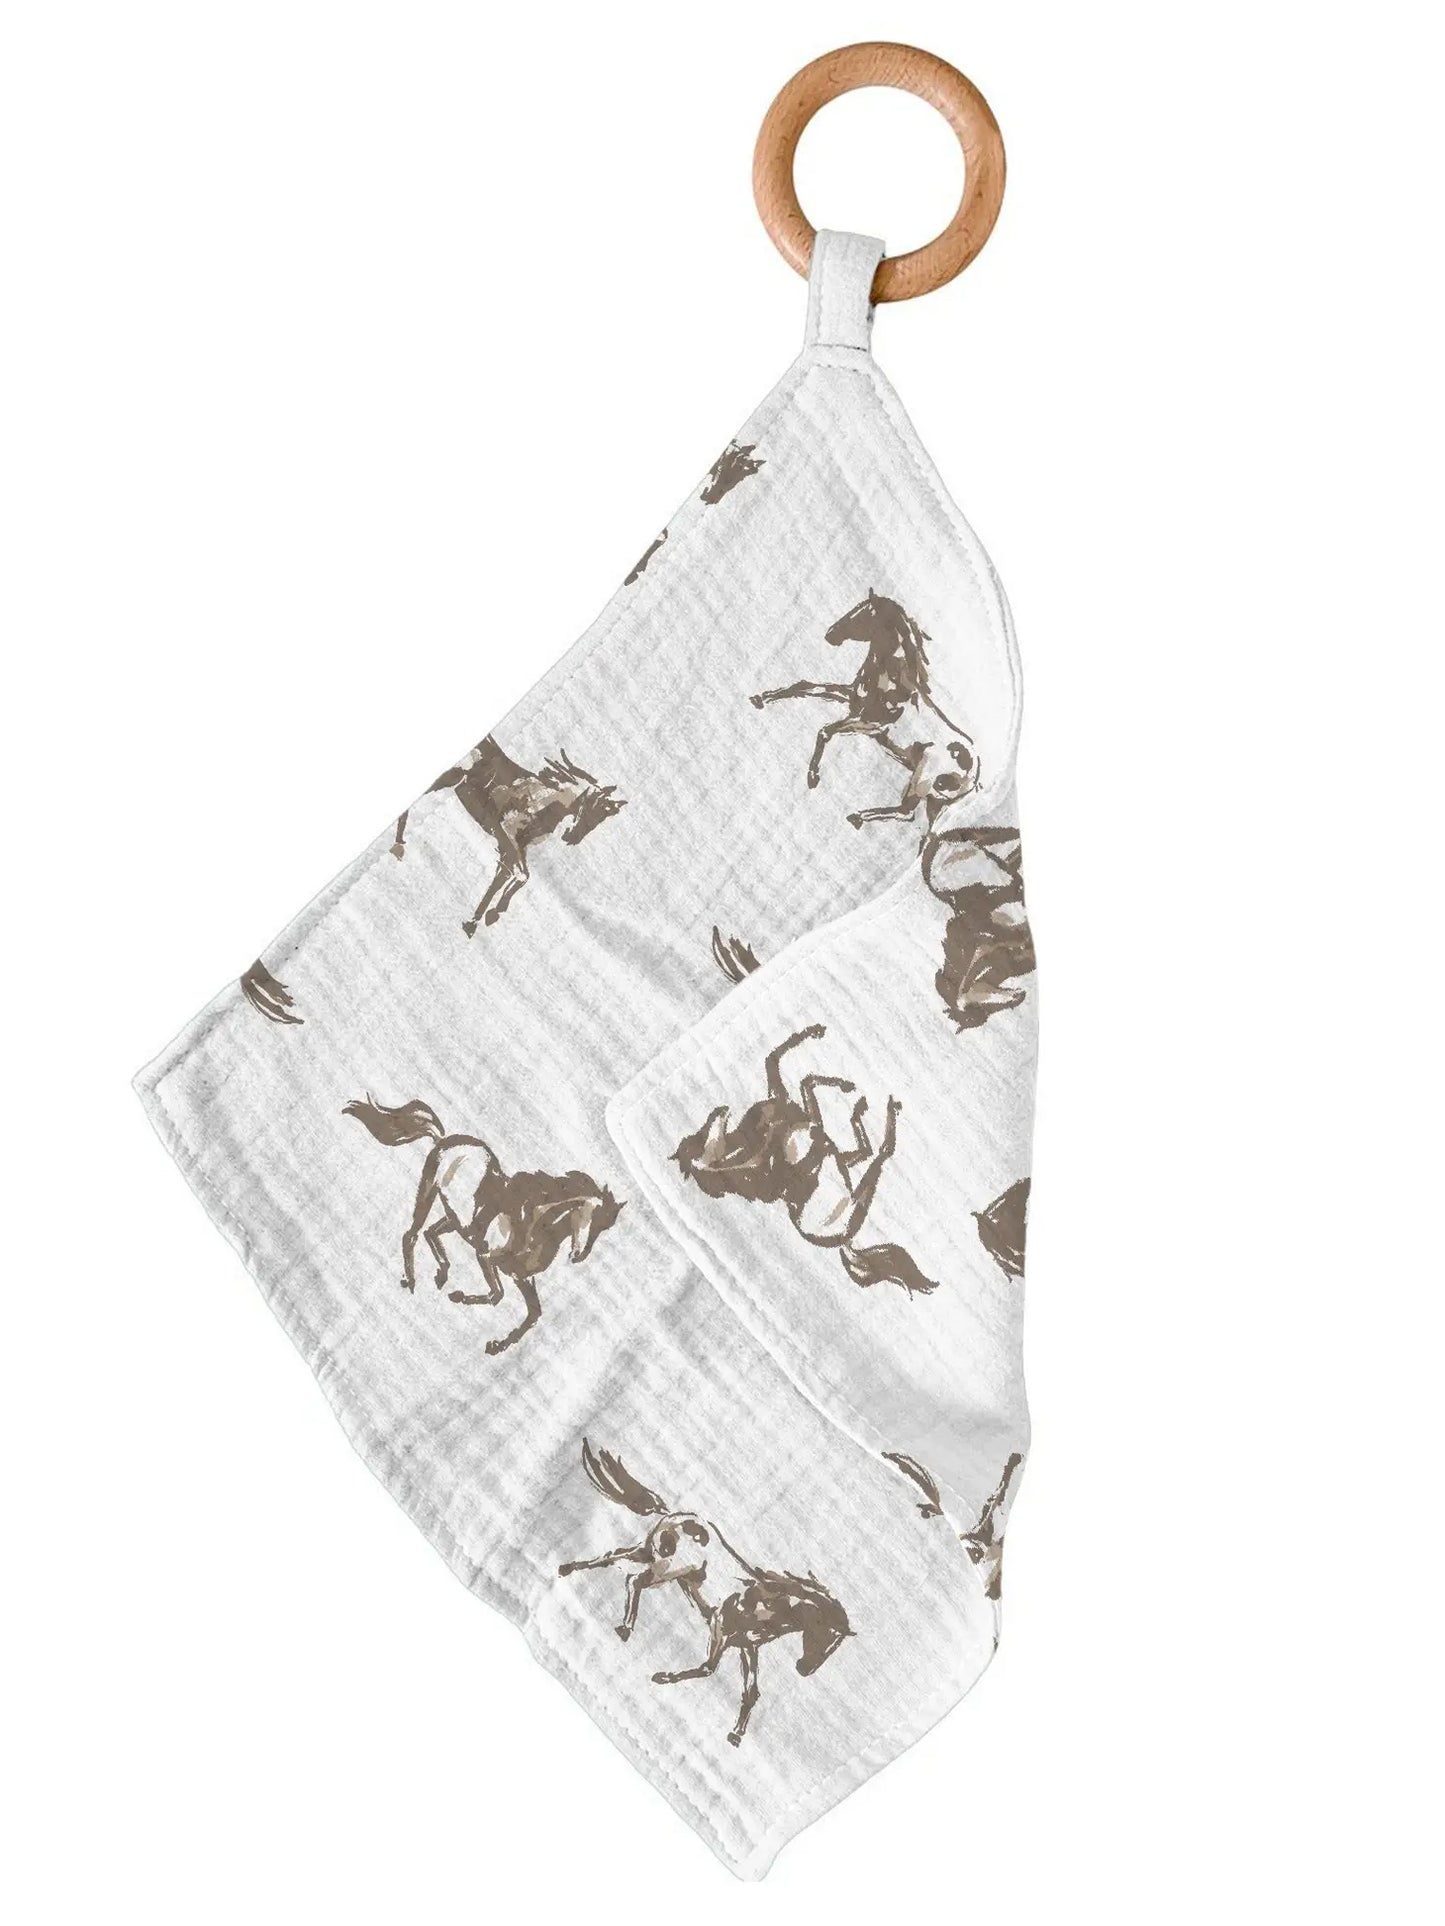 galloping horse teether